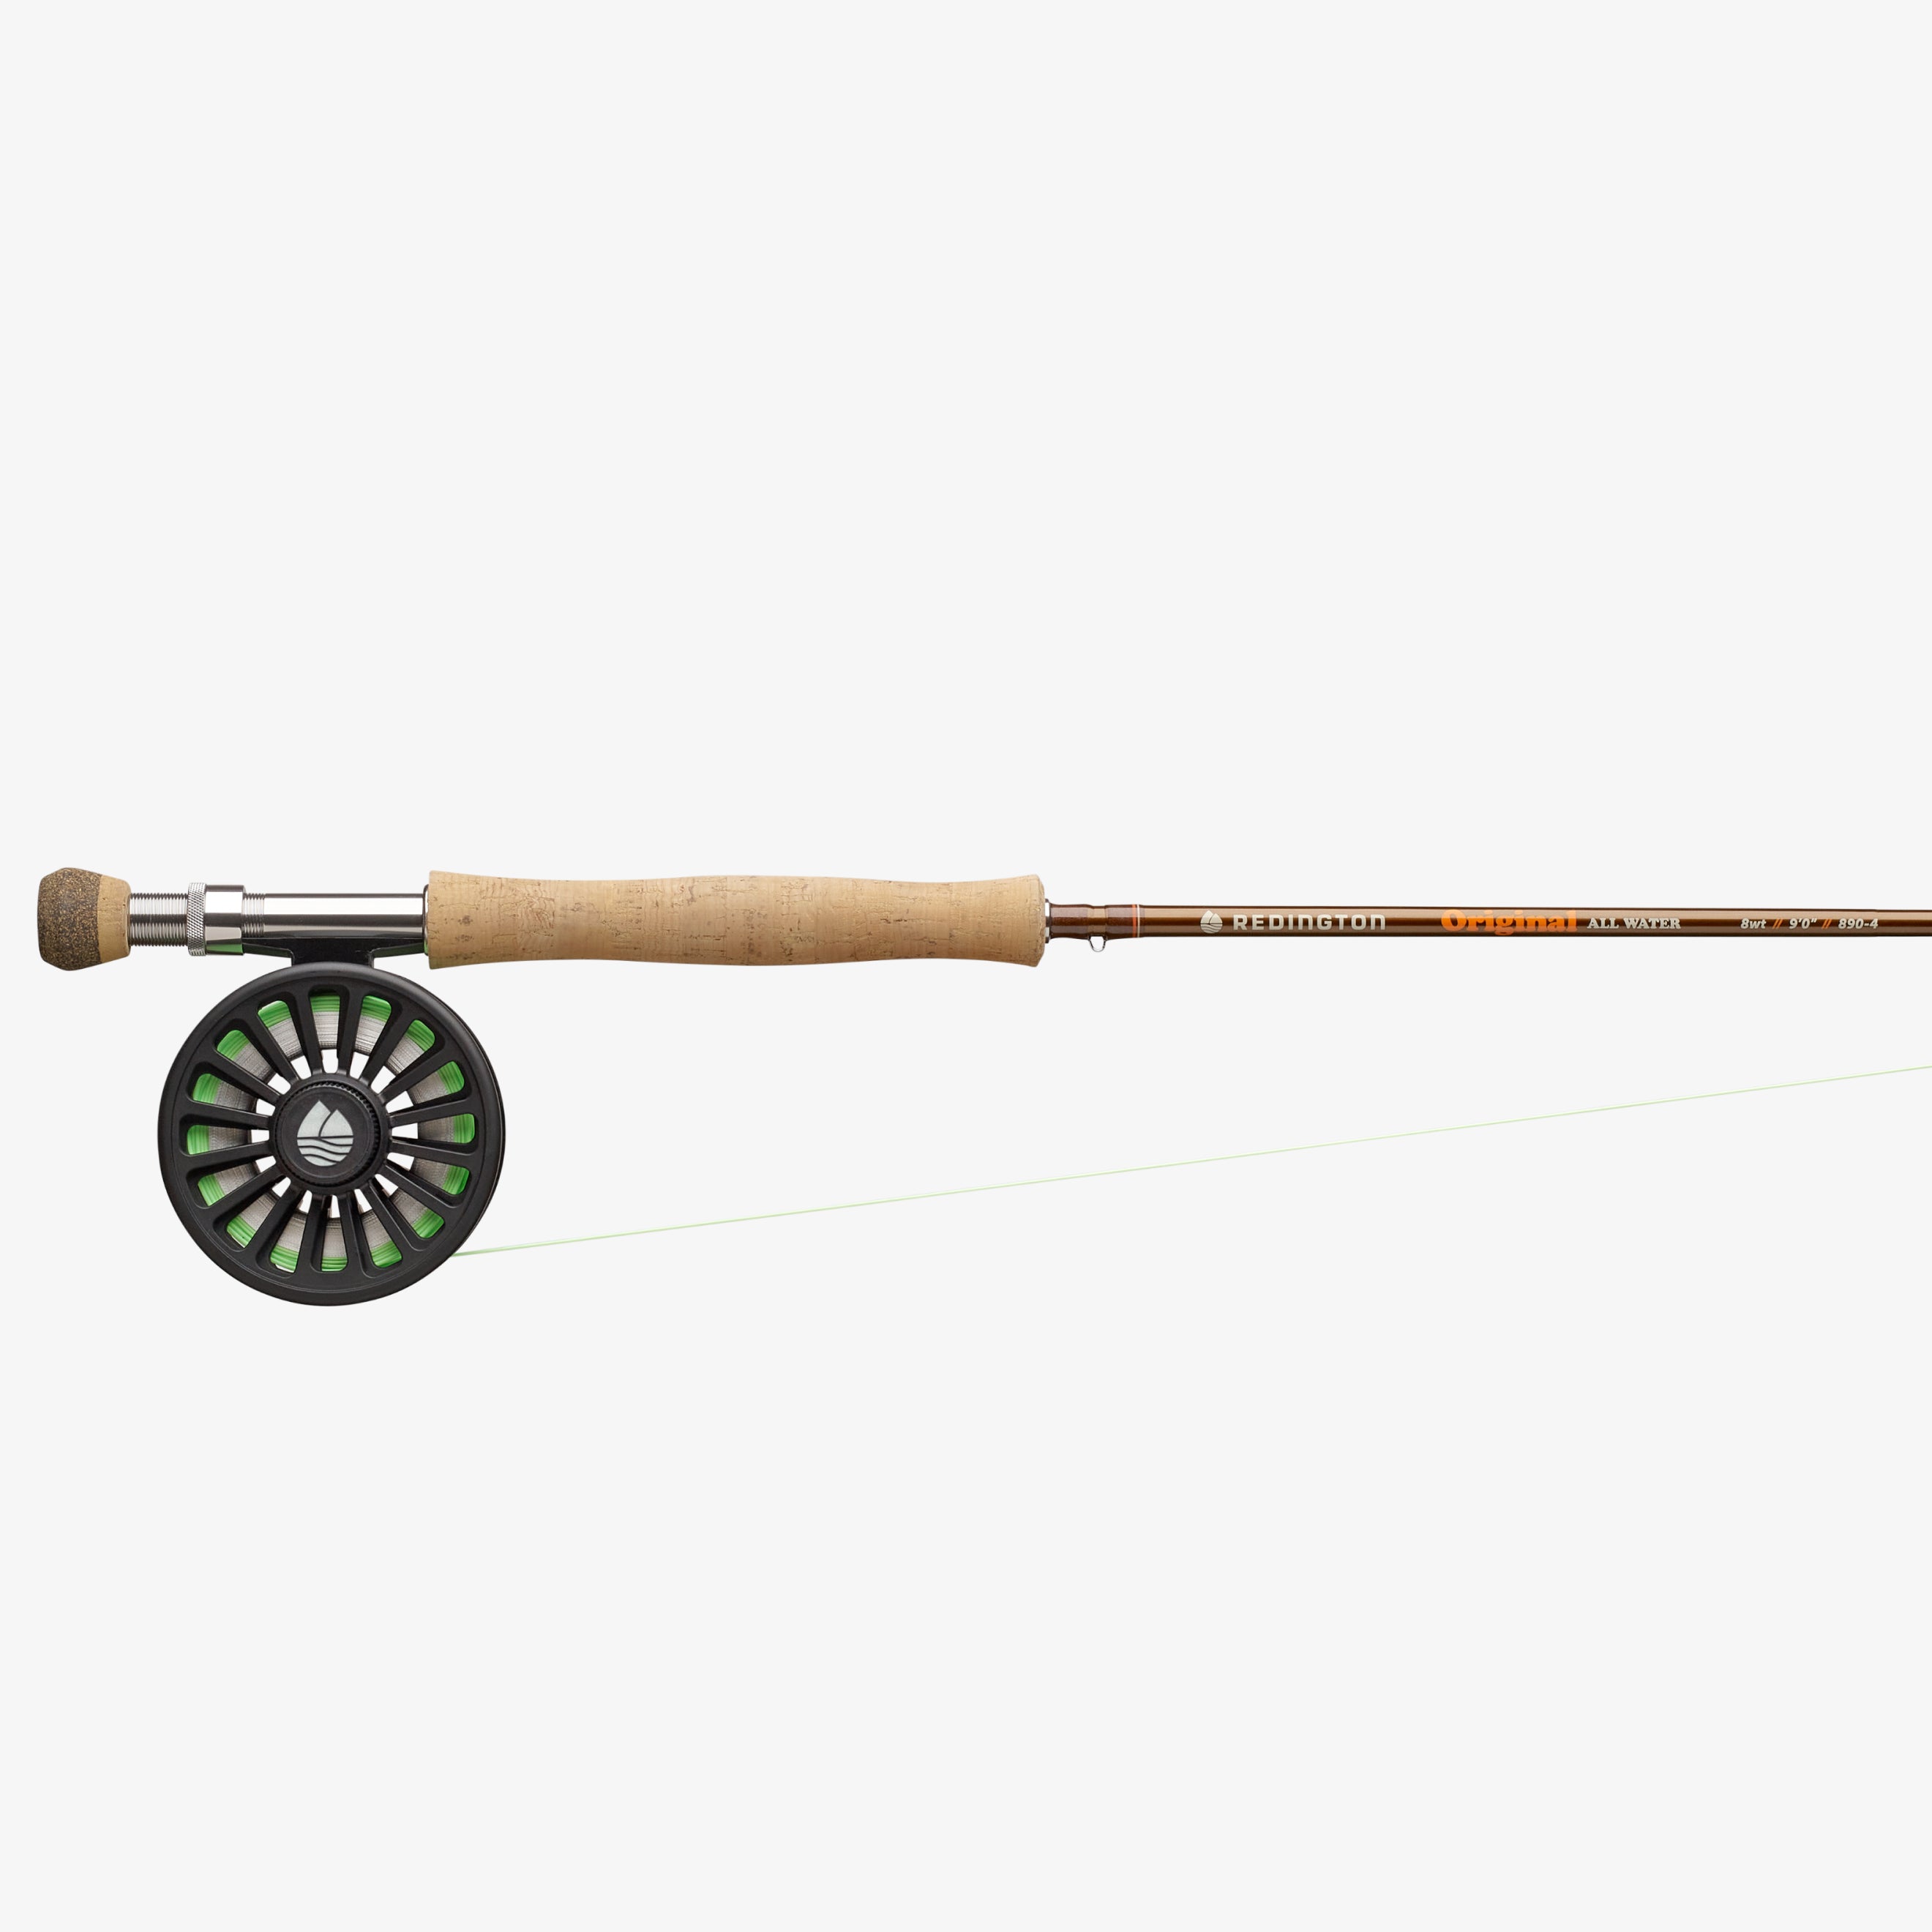 Redington All-Water Fly Fishing Rod and Reel Combo - 9ft, 9lb Line Weight -  Cordura Construction - Red Finish in the Fishing Equipment department at